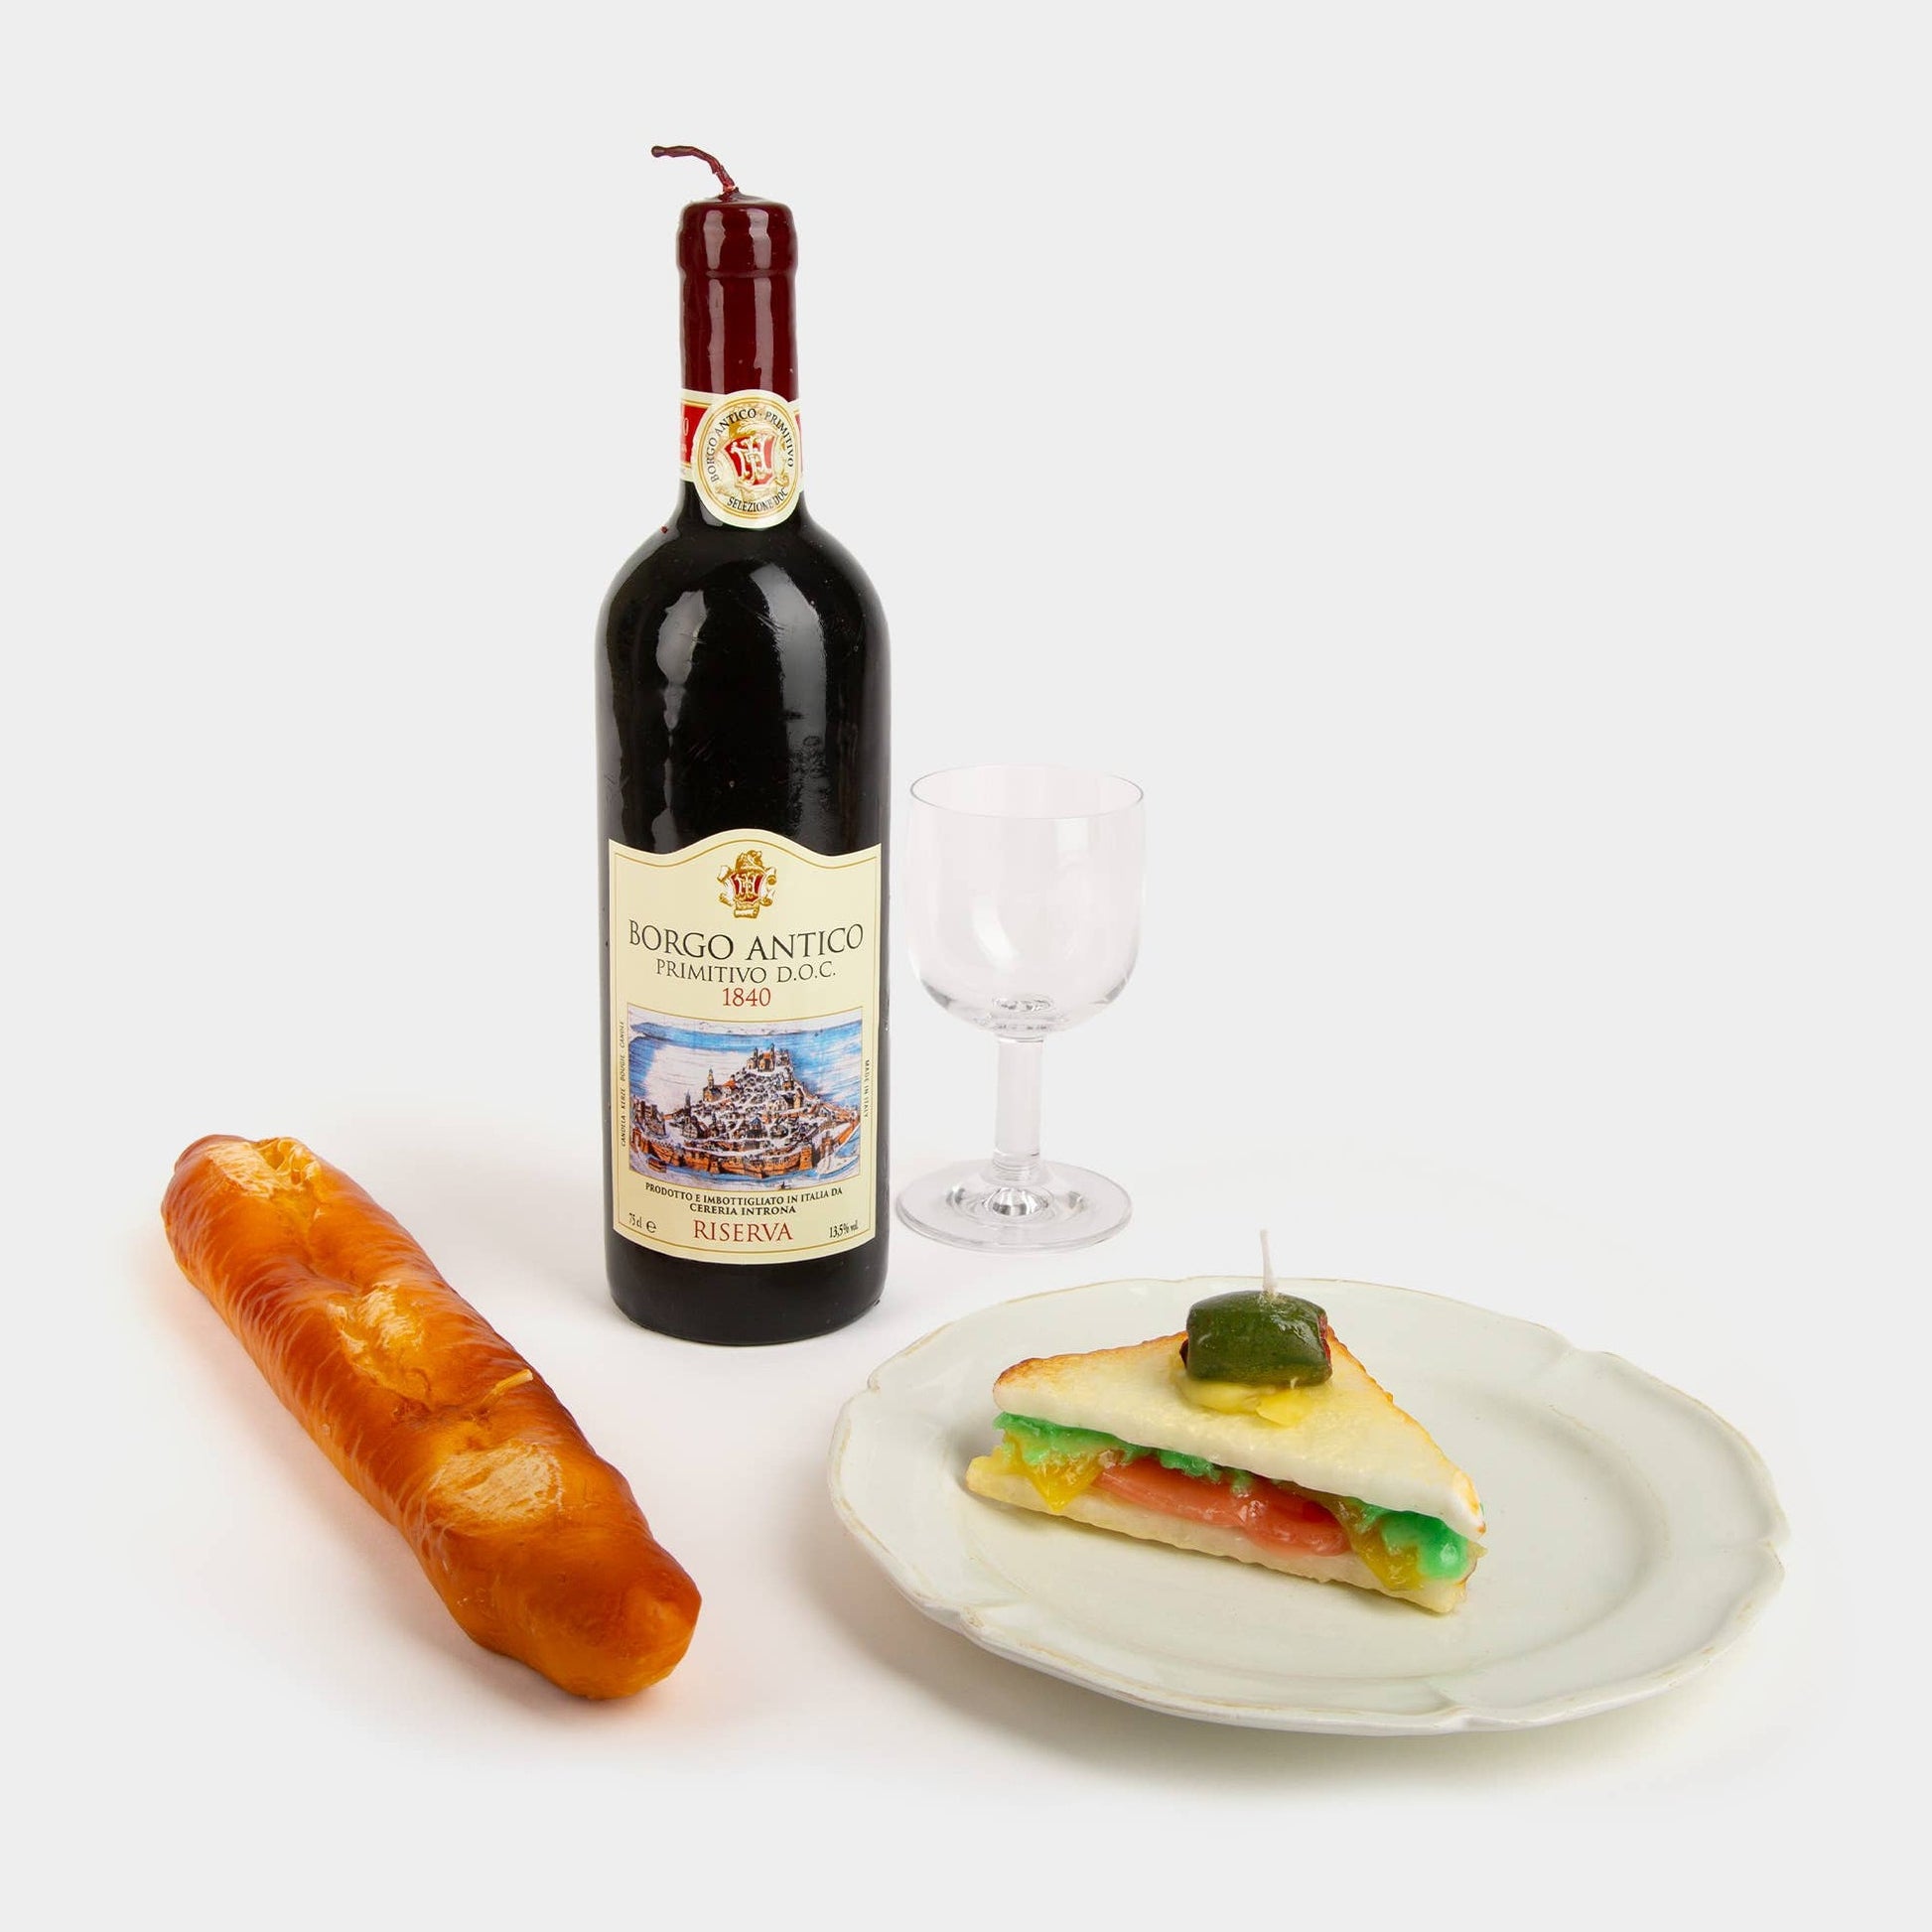 Ensemble of wax candles shaped like a realistic wine bottle, baguette, and sandwich.